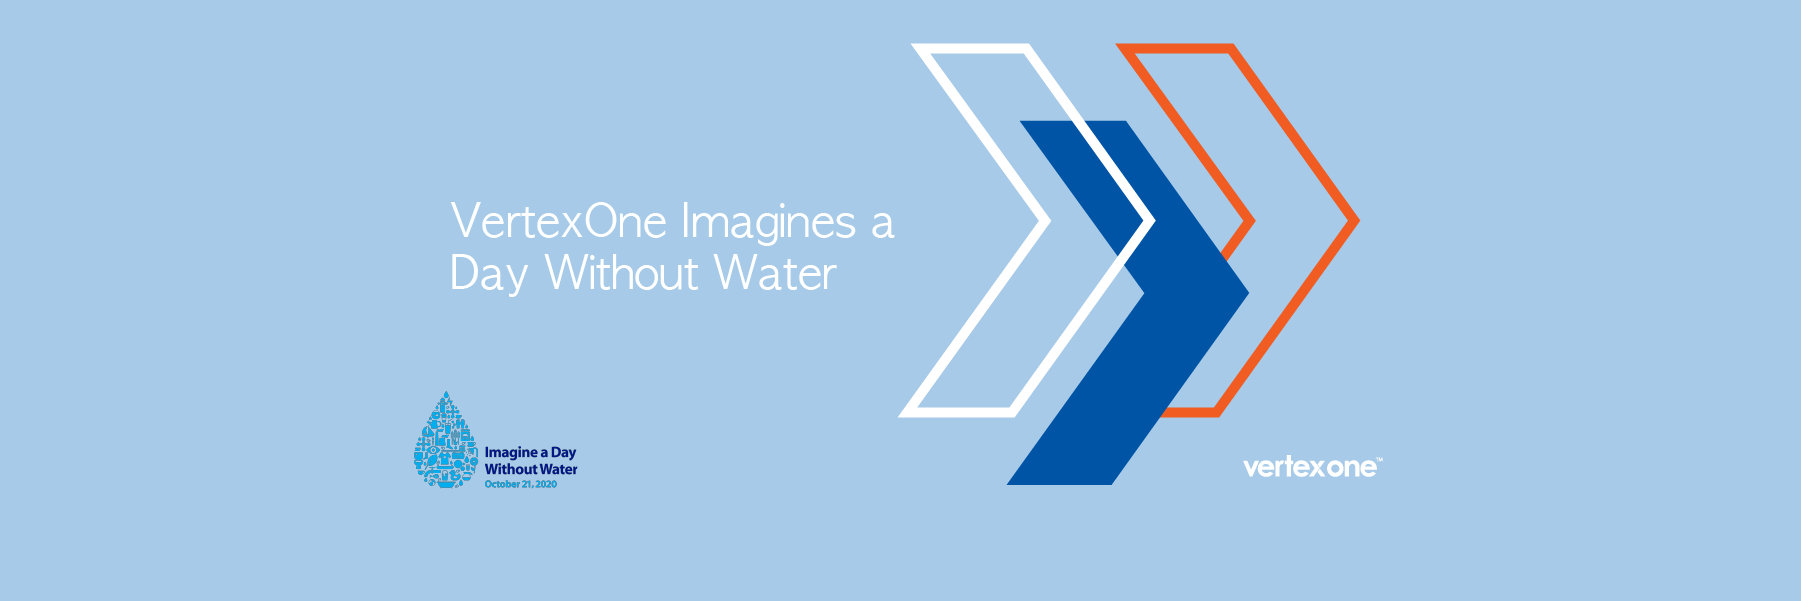 VertexOne Imagines a Day Without Water